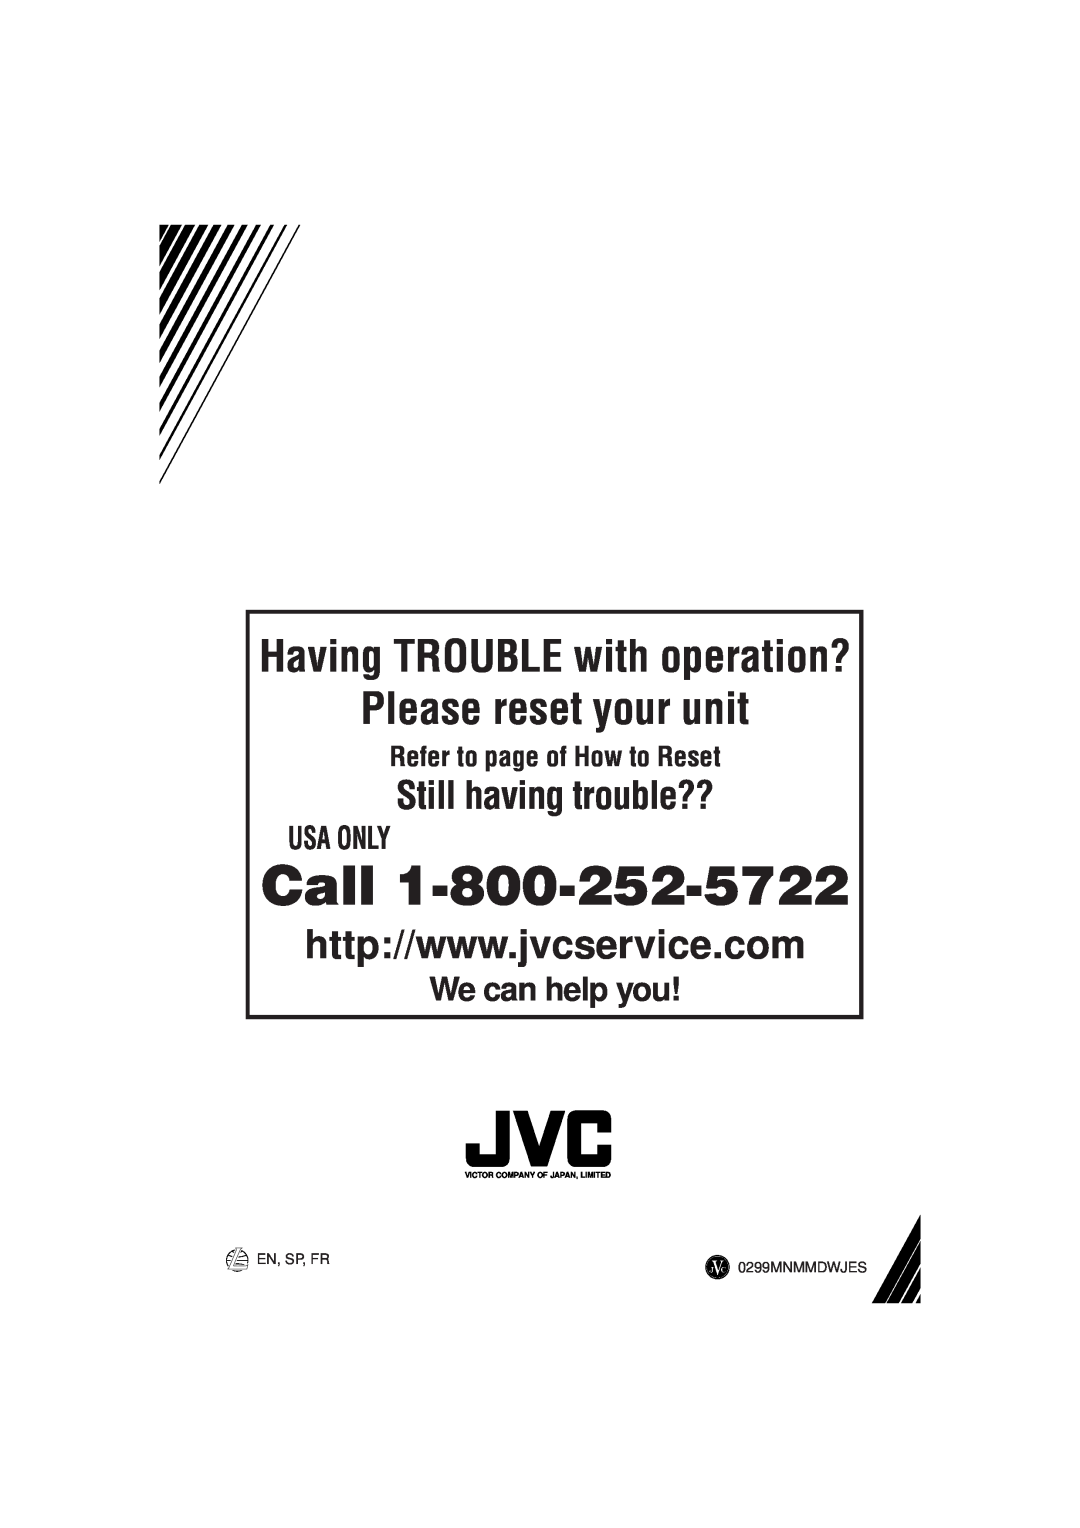 JVC KD-LX1 Refer to page of How to Reset, Call, Please reset your unit, Having TROUBLE with operation?, We can help you 